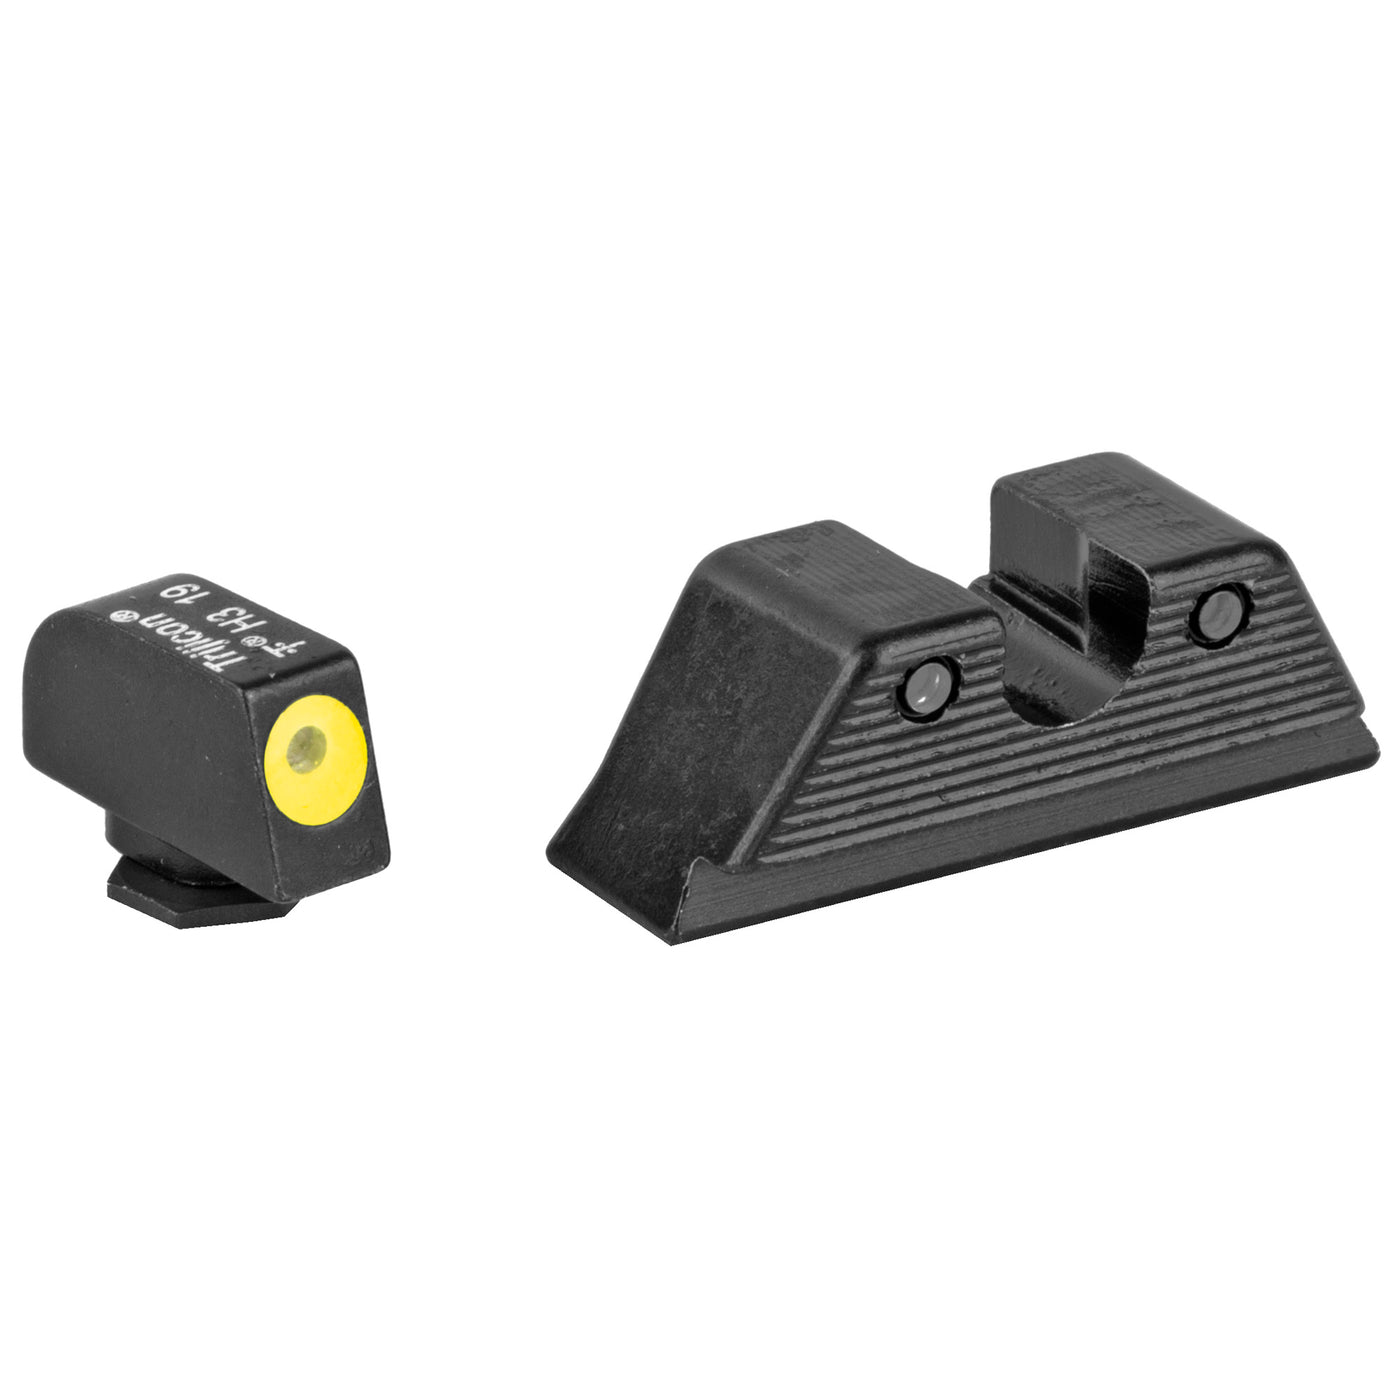 Trijicon Night Sight Set Hd - Yellow Outline For Glock 17mos